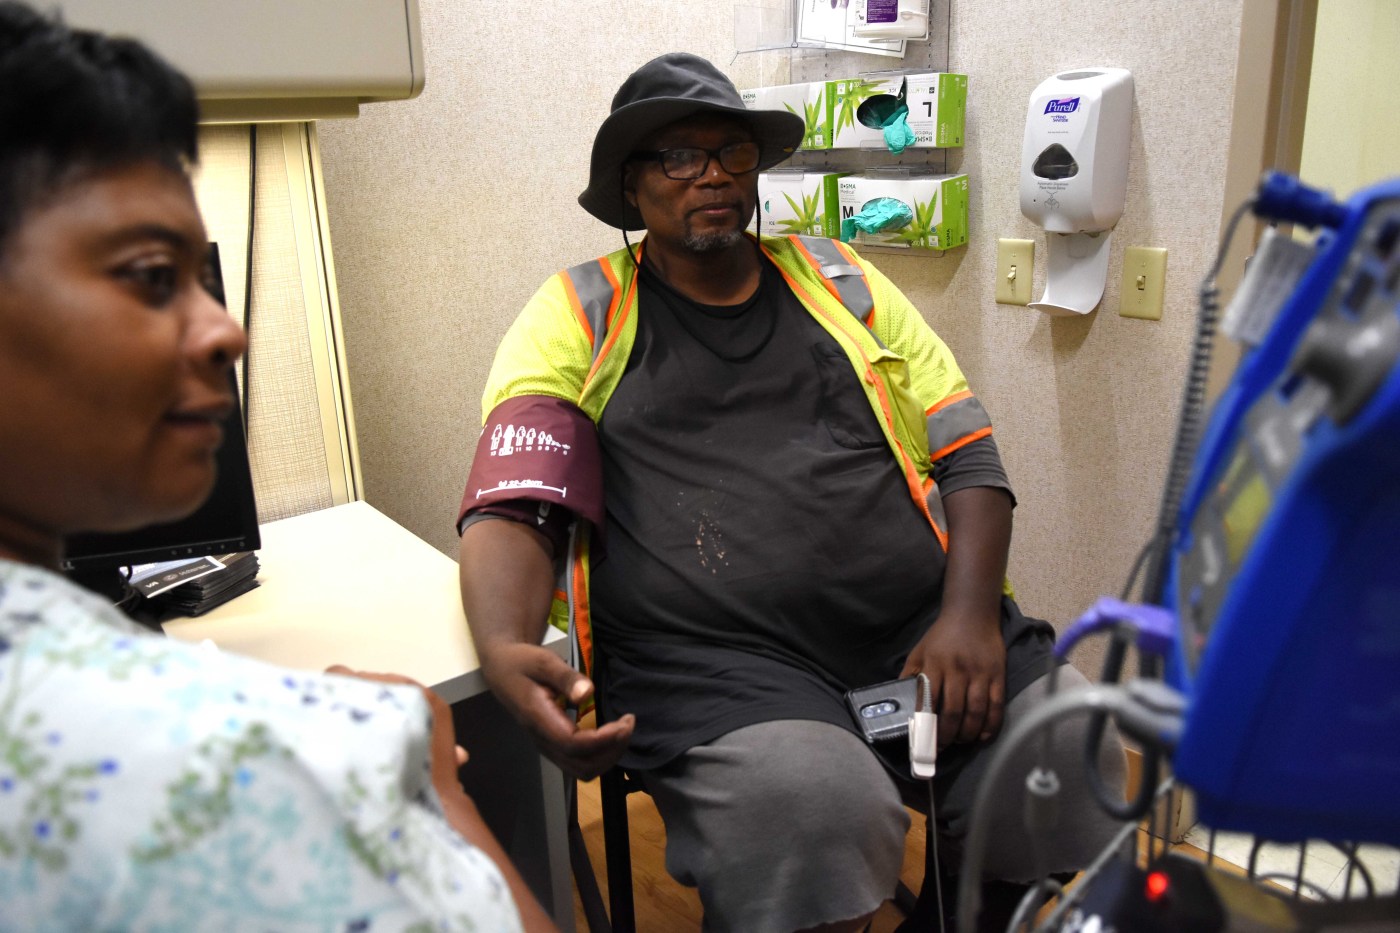 Veteran at Dallas' Bravo Clinic getting his vitals checked thanks to after-hours appointment times.